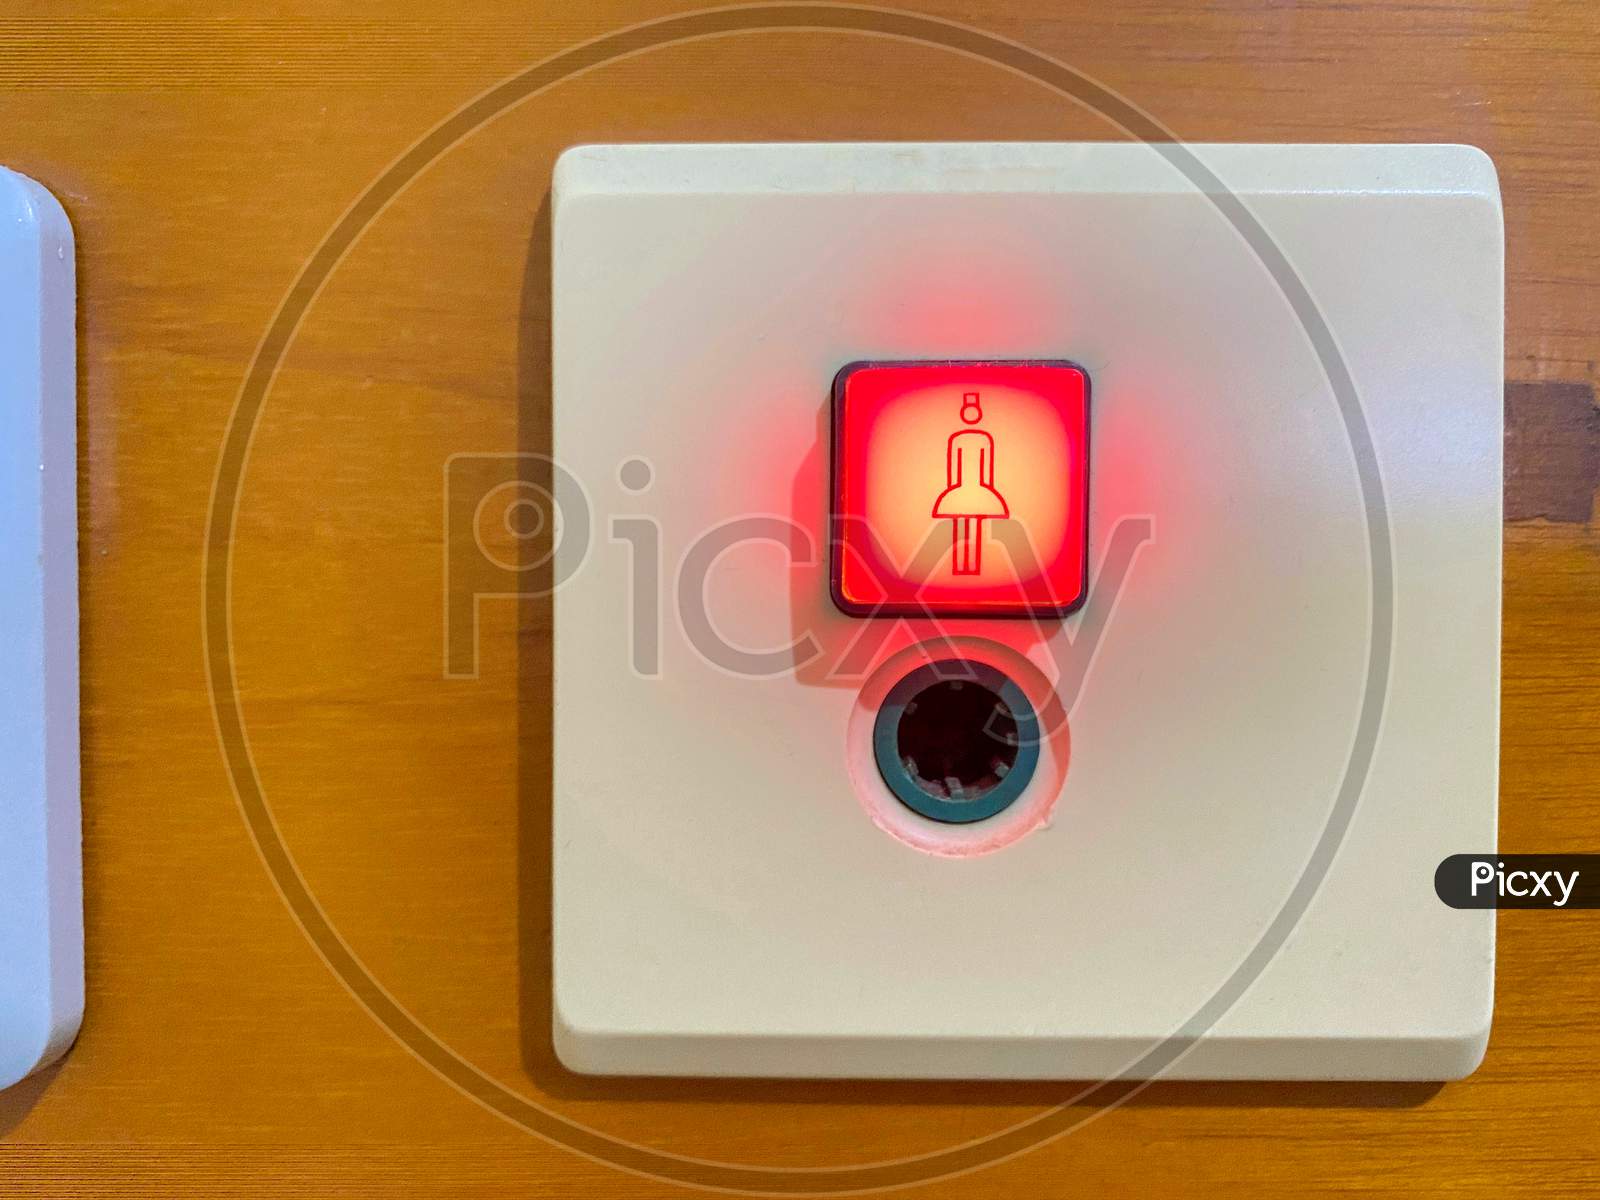 Button Of The Nurses Call System In Hospital Light On